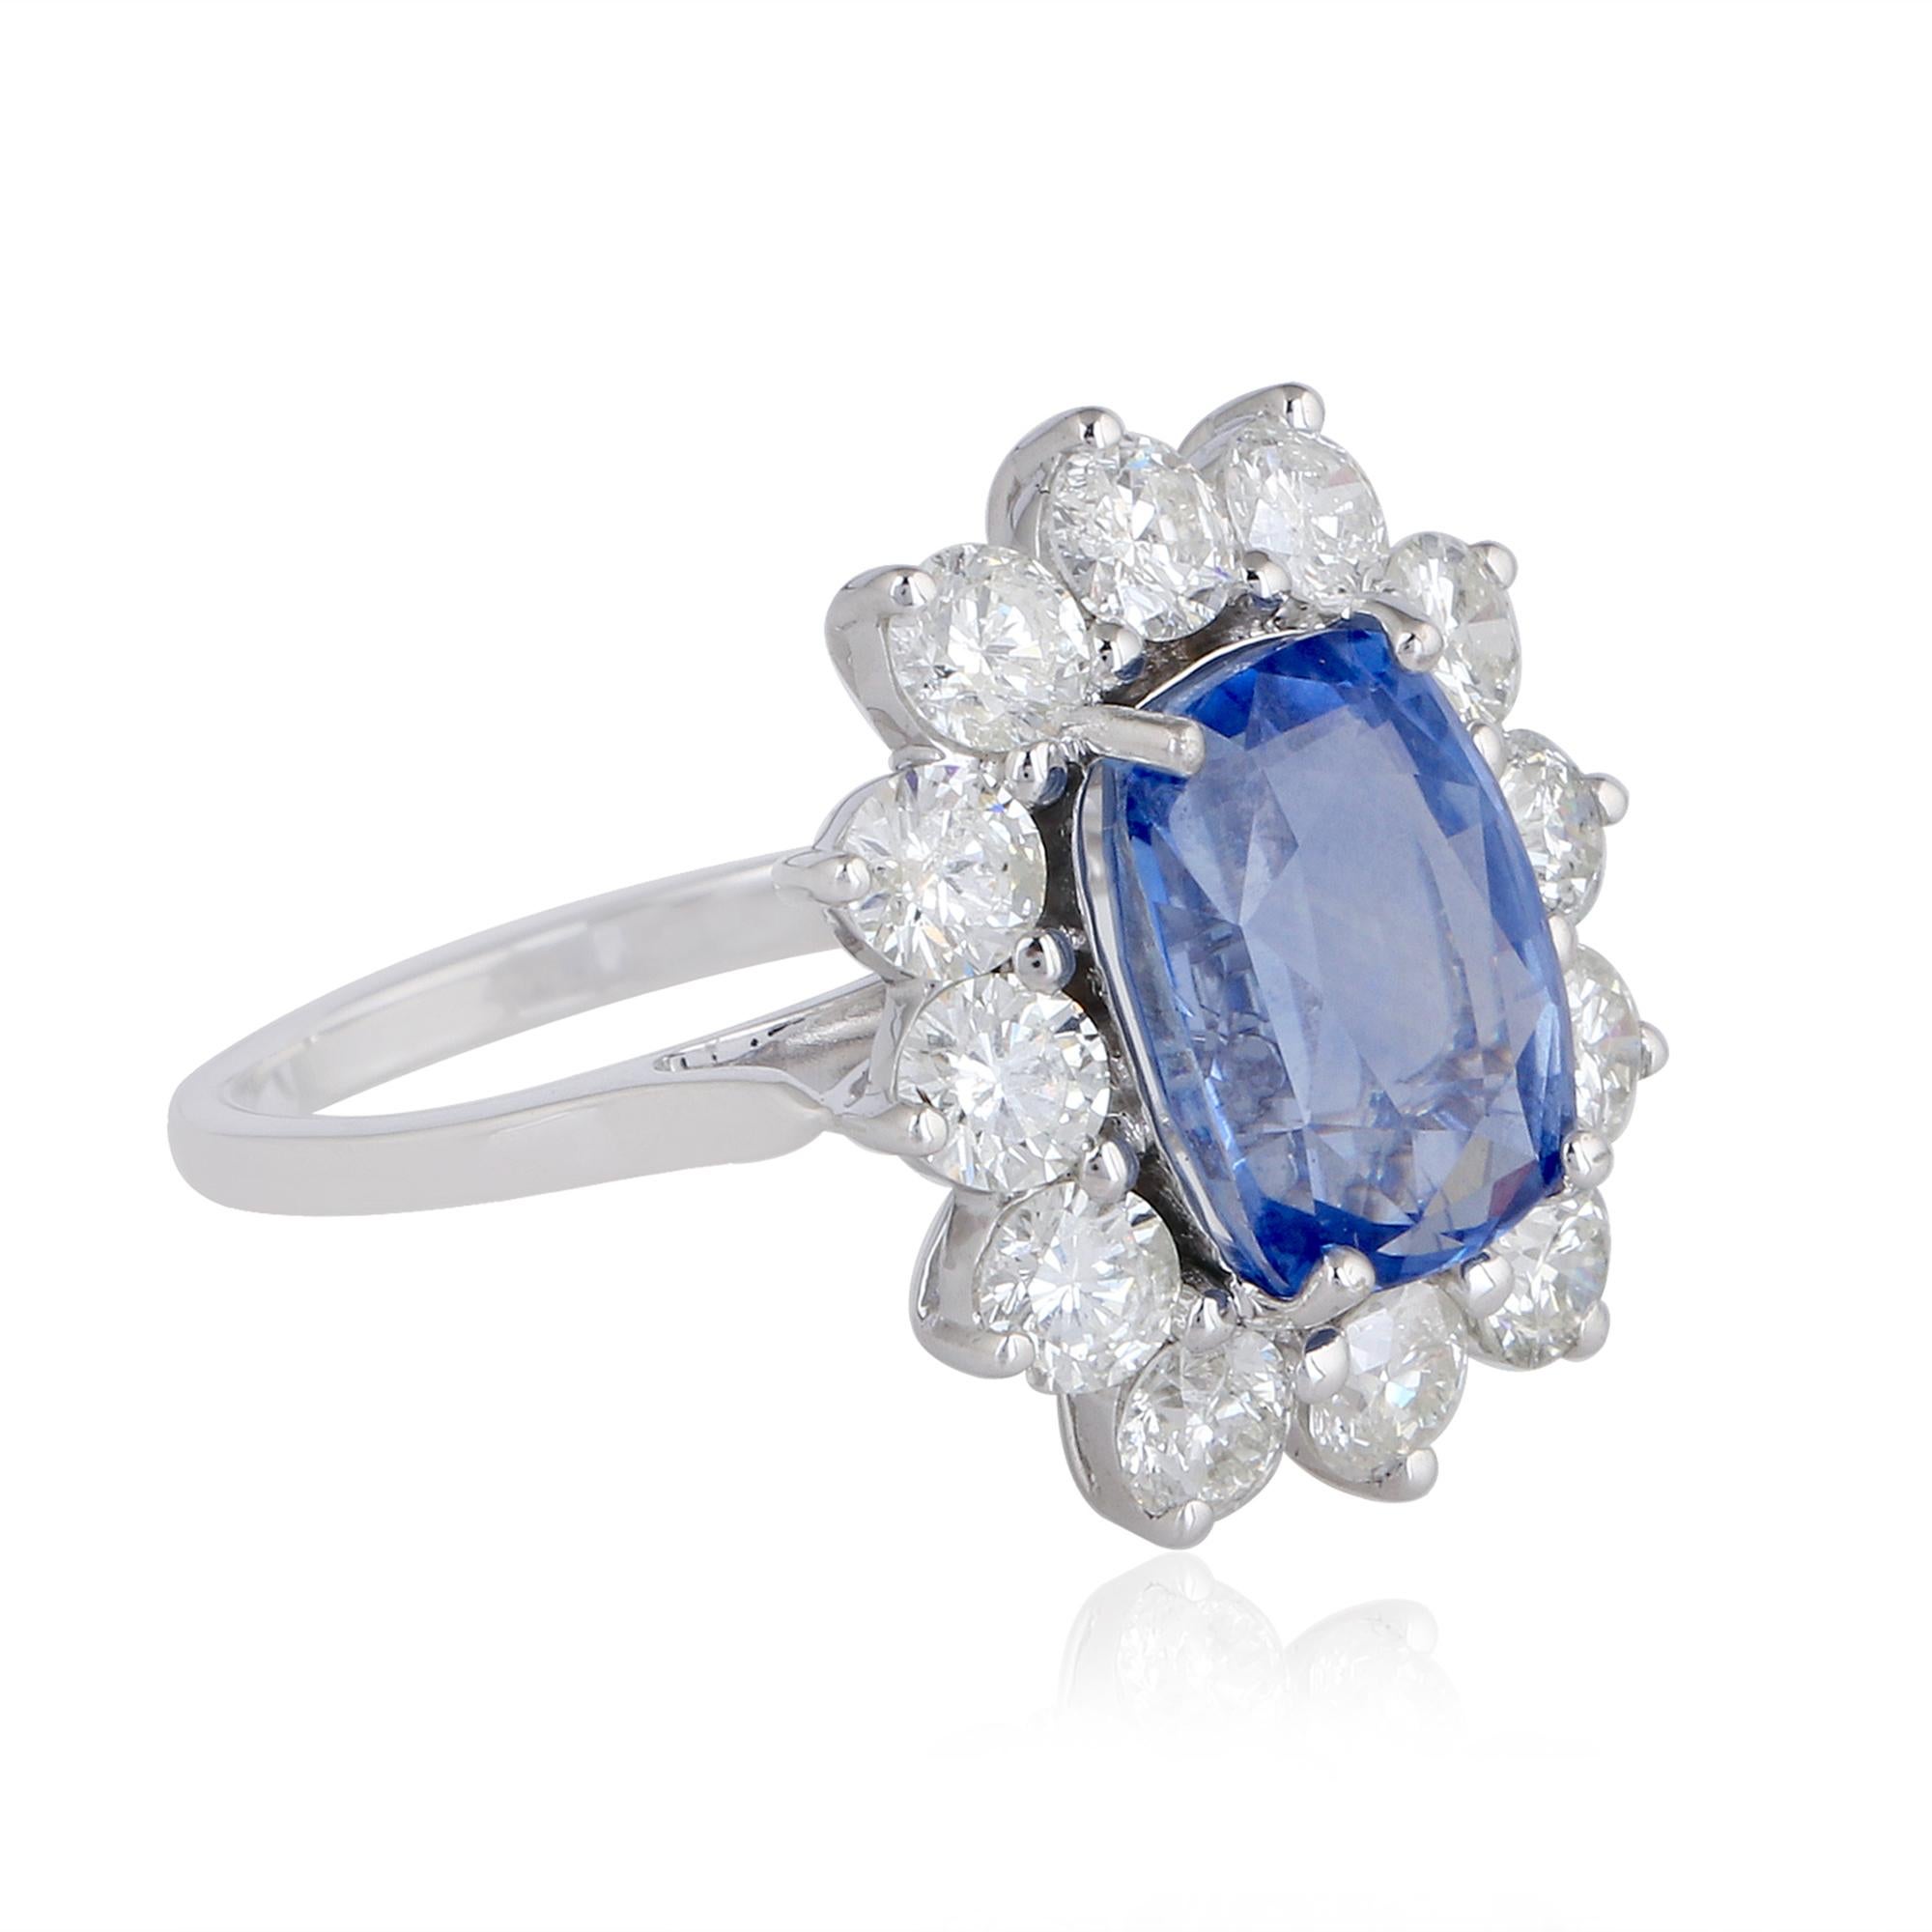 For Sale:  Blue Sapphire Gemstone Cocktail Ring Diamond 18 Kt White Gold Handmade Jewelry 3